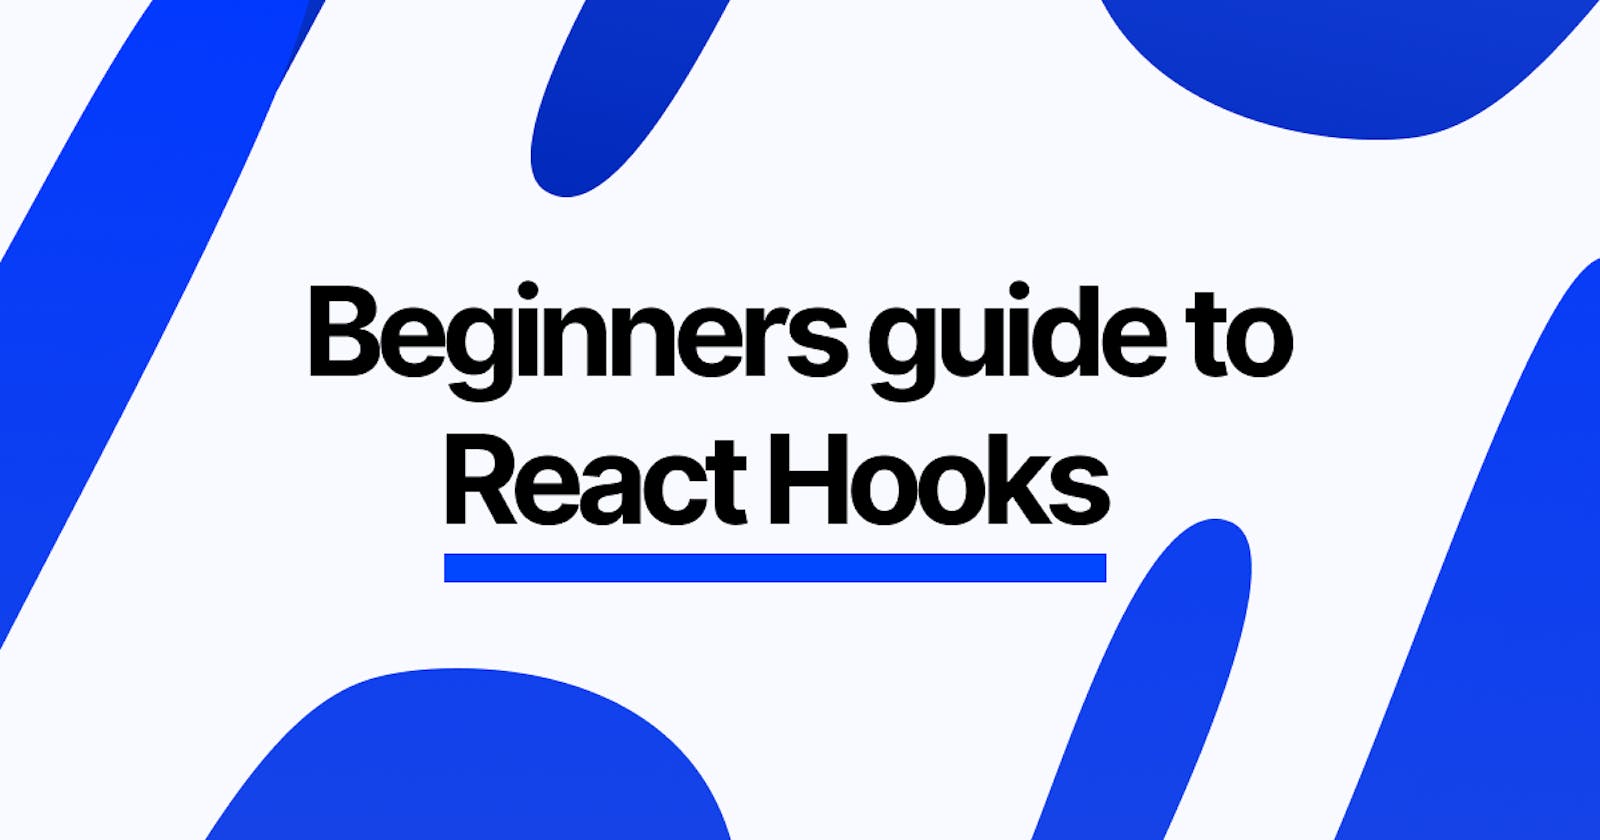 Beginners guide to React Hooks (2020)